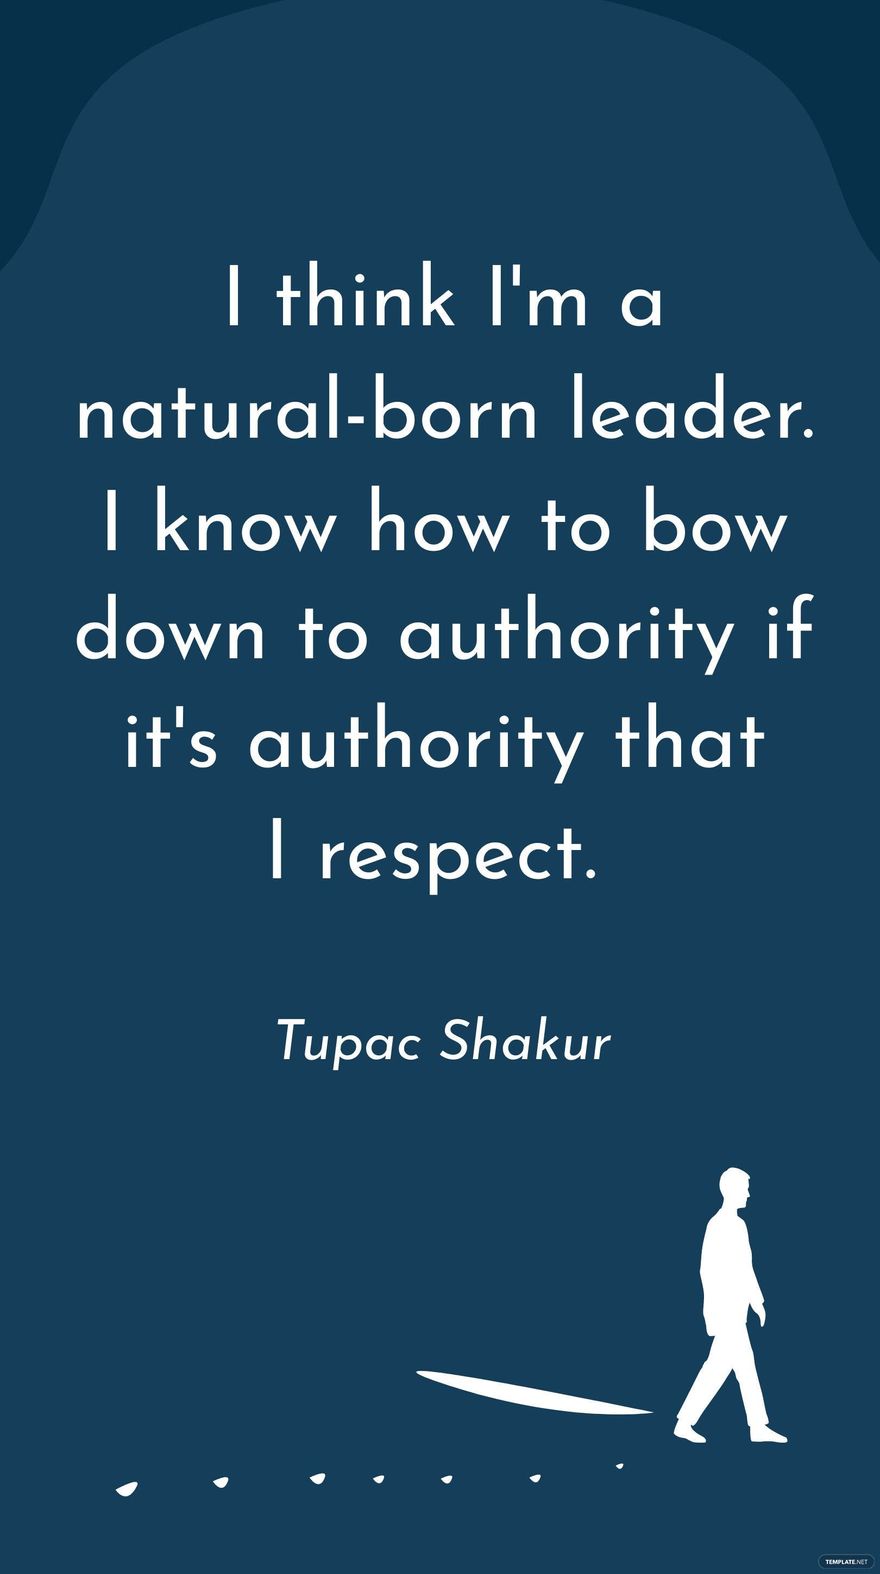 Tupac Shakur - I think I'm a natural-born leader. I know how to bow down to authority if it's authority that I respect.